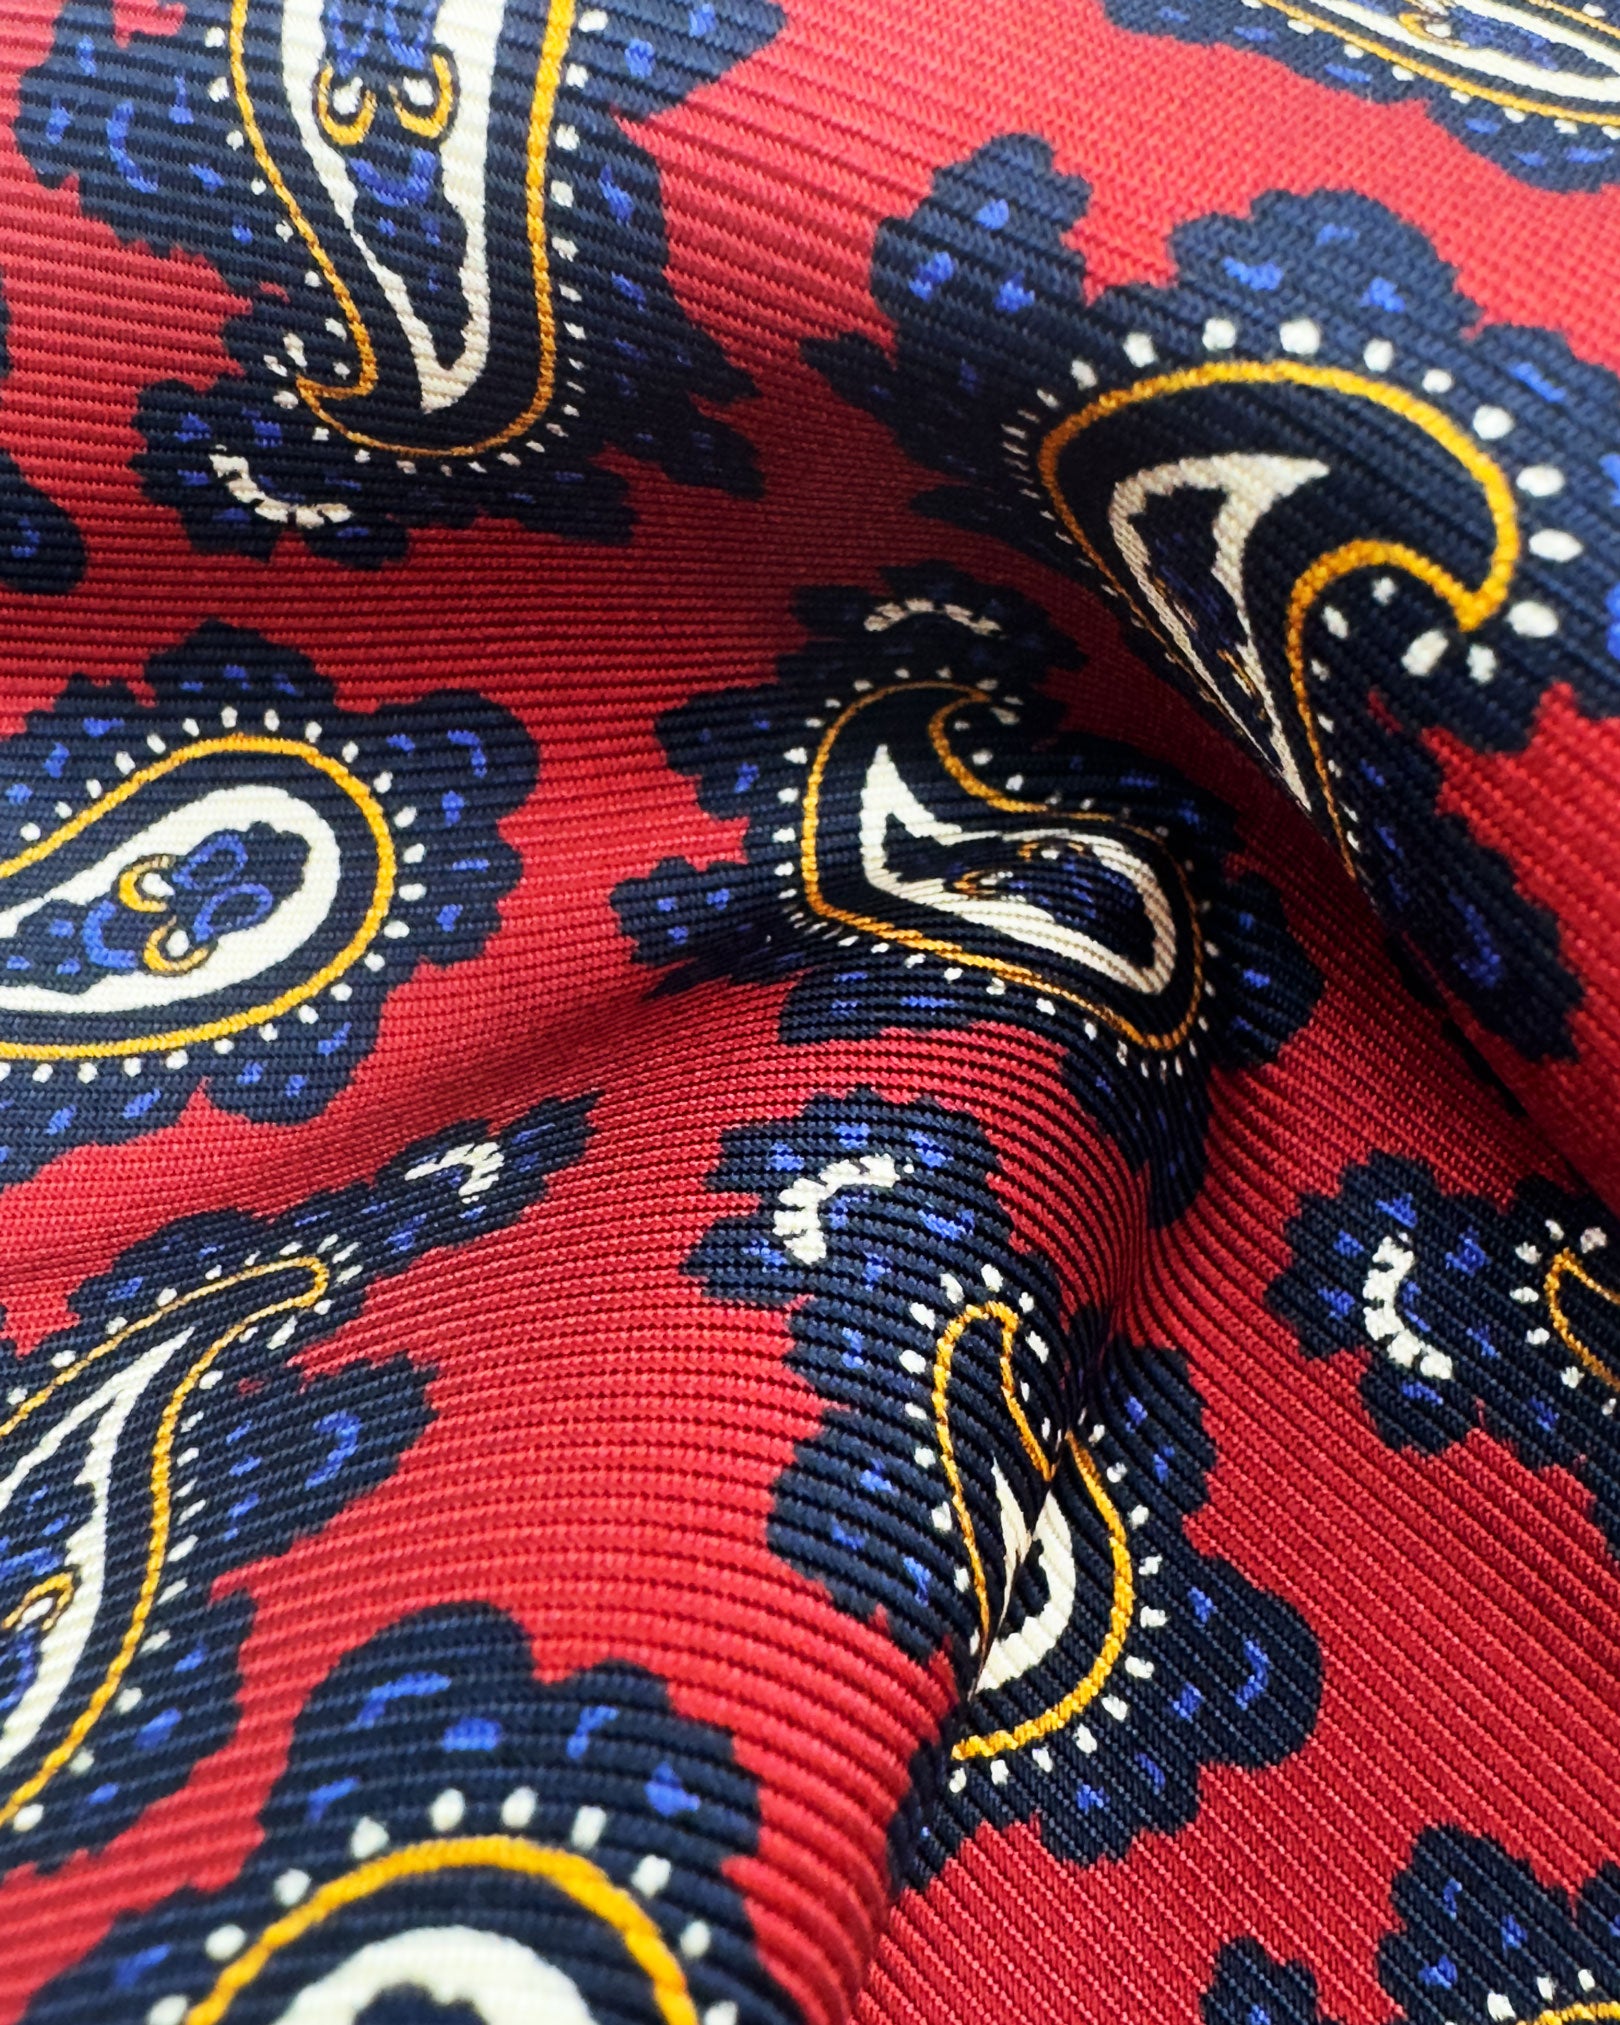 A ruffled close-up of the 'Binham' pocket square, presenting a closer view of the paisley patterns against the attractive lustre of the deadstock silk material. 